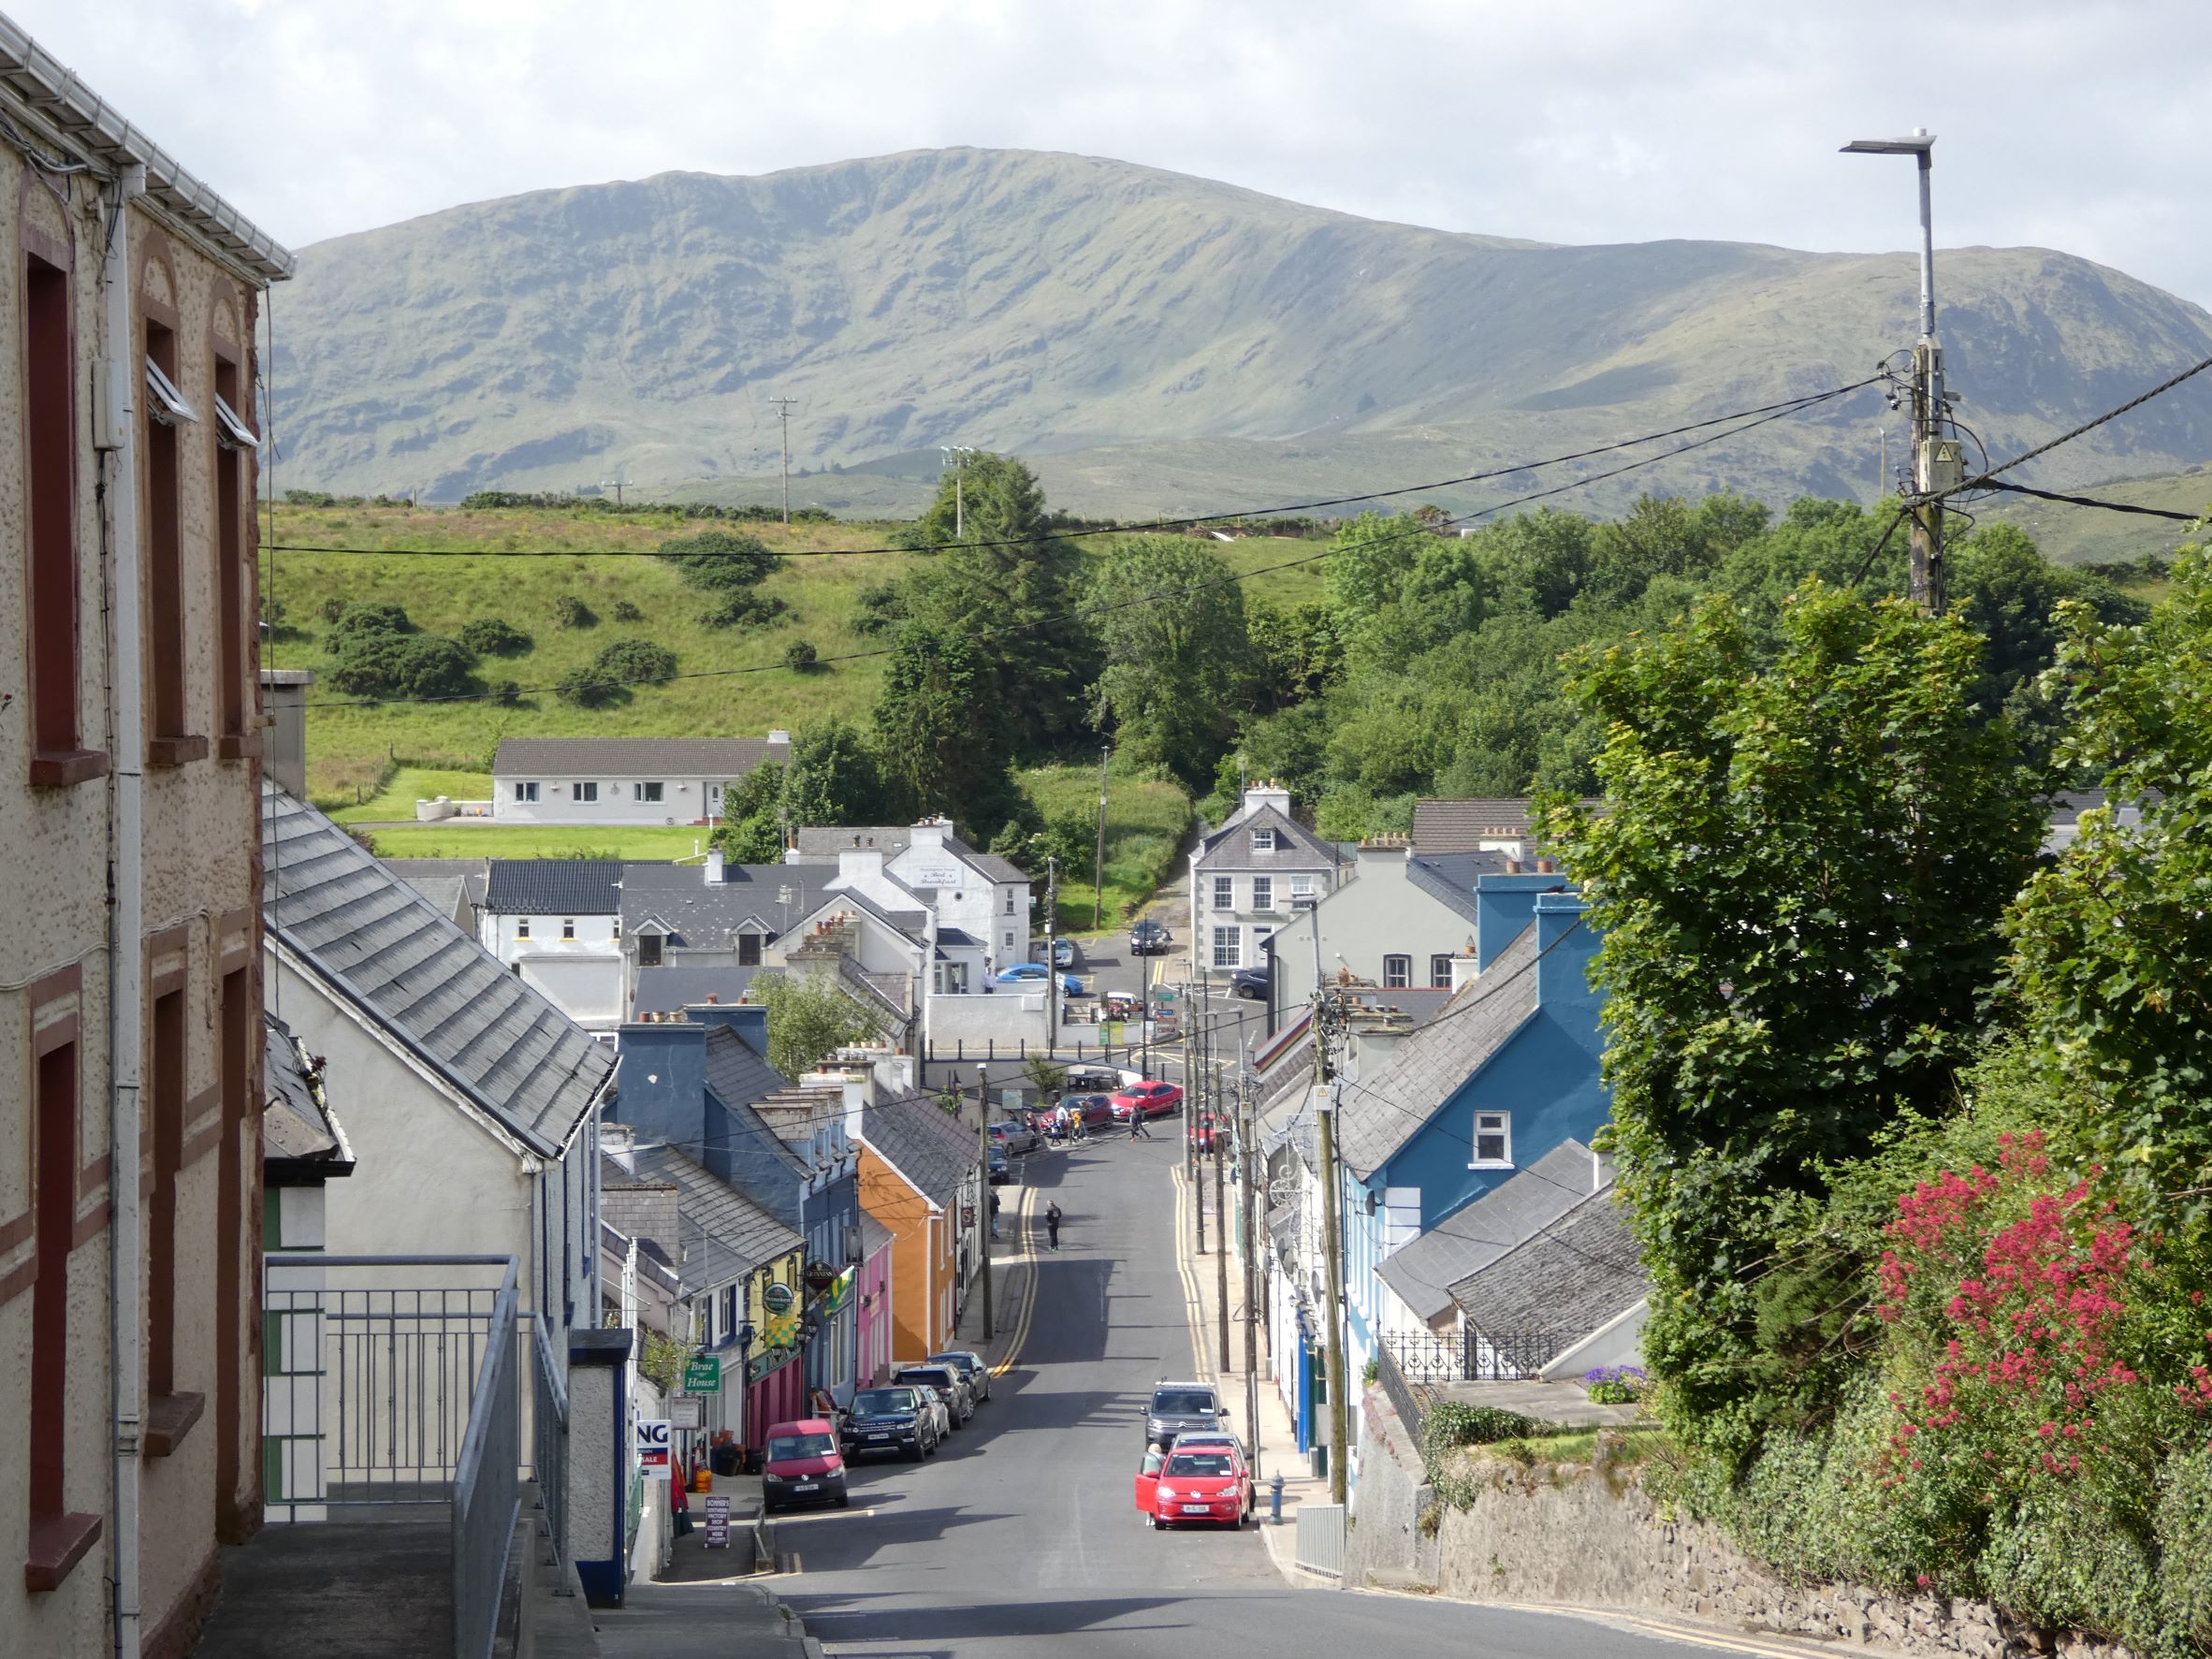 Ardara is a small town in the South West of Donegal, next to the 